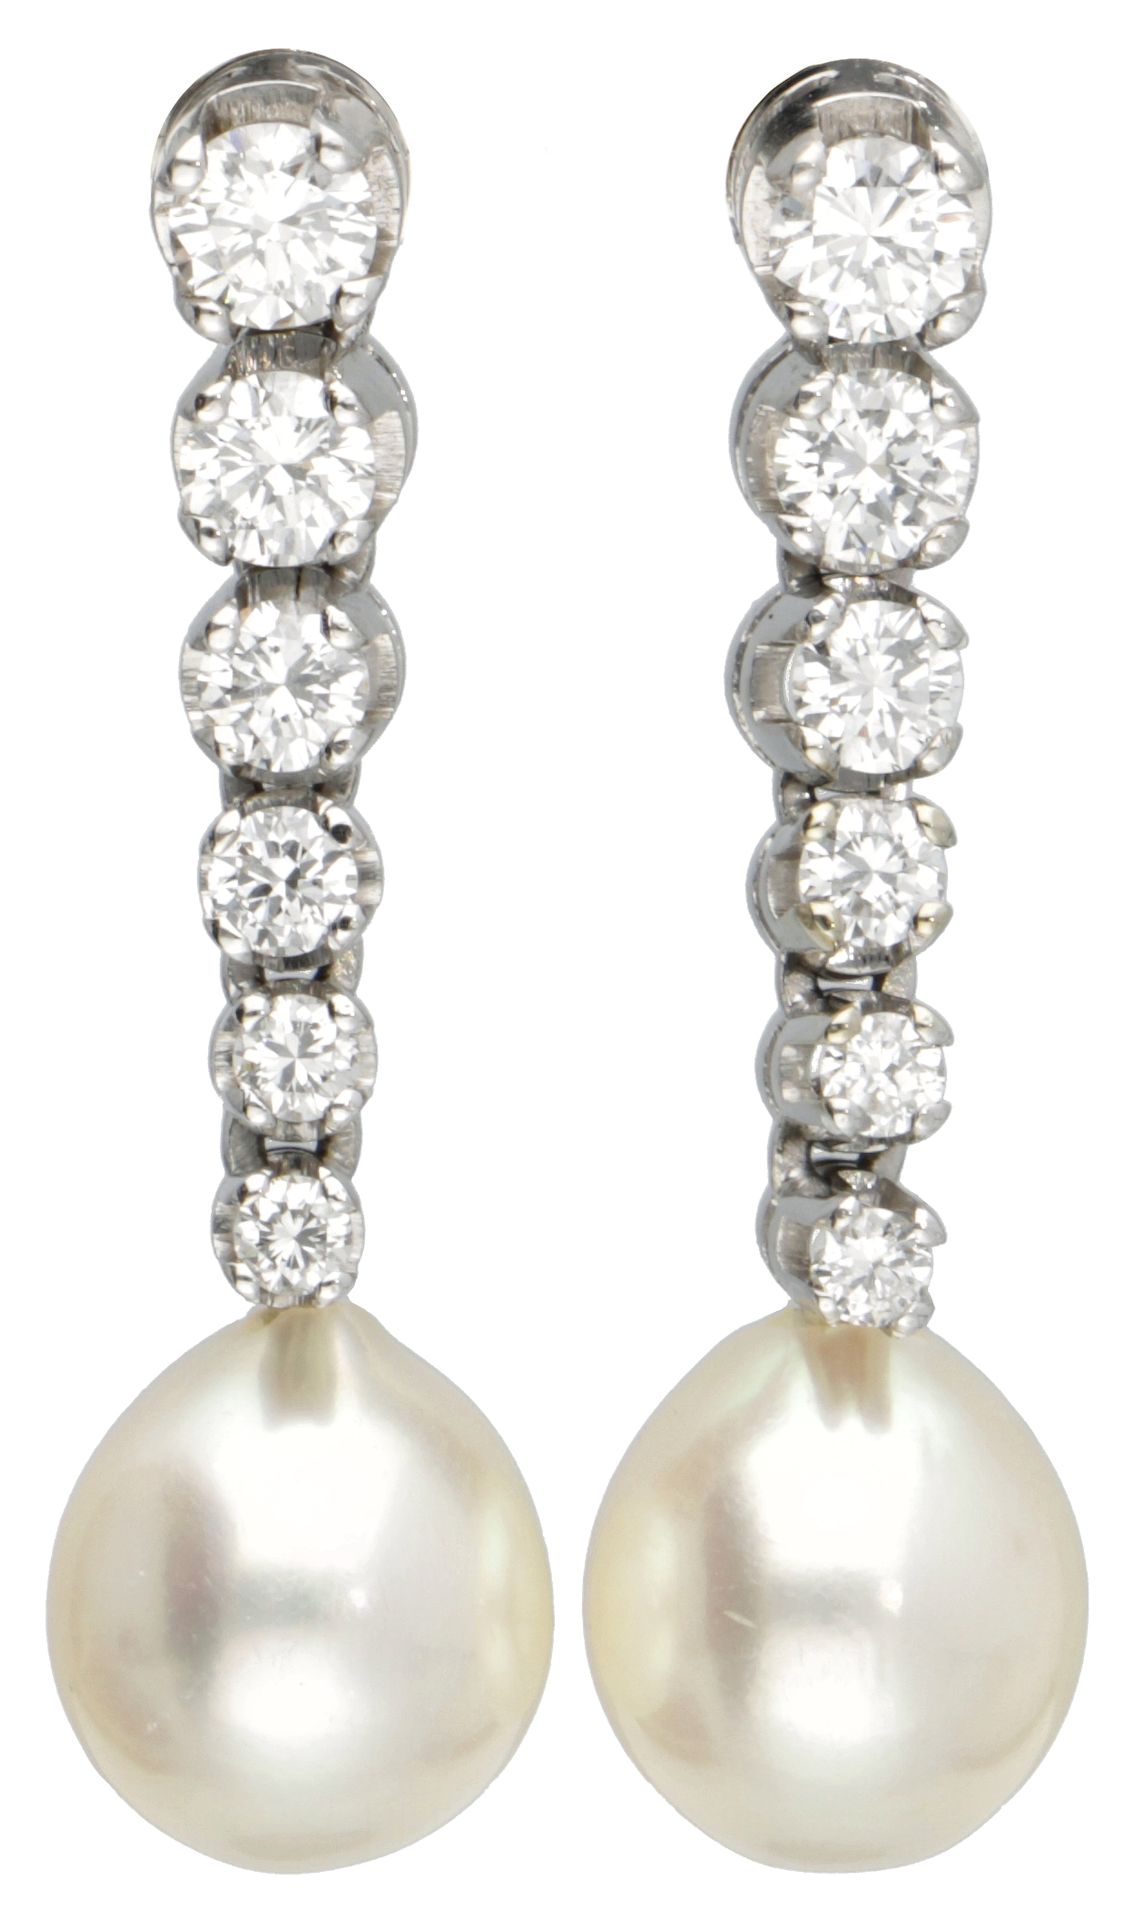 18K. White gold earrings set with approx. 0.85 ct. Diamond and pearl. 印章：750，XX。&hellip;